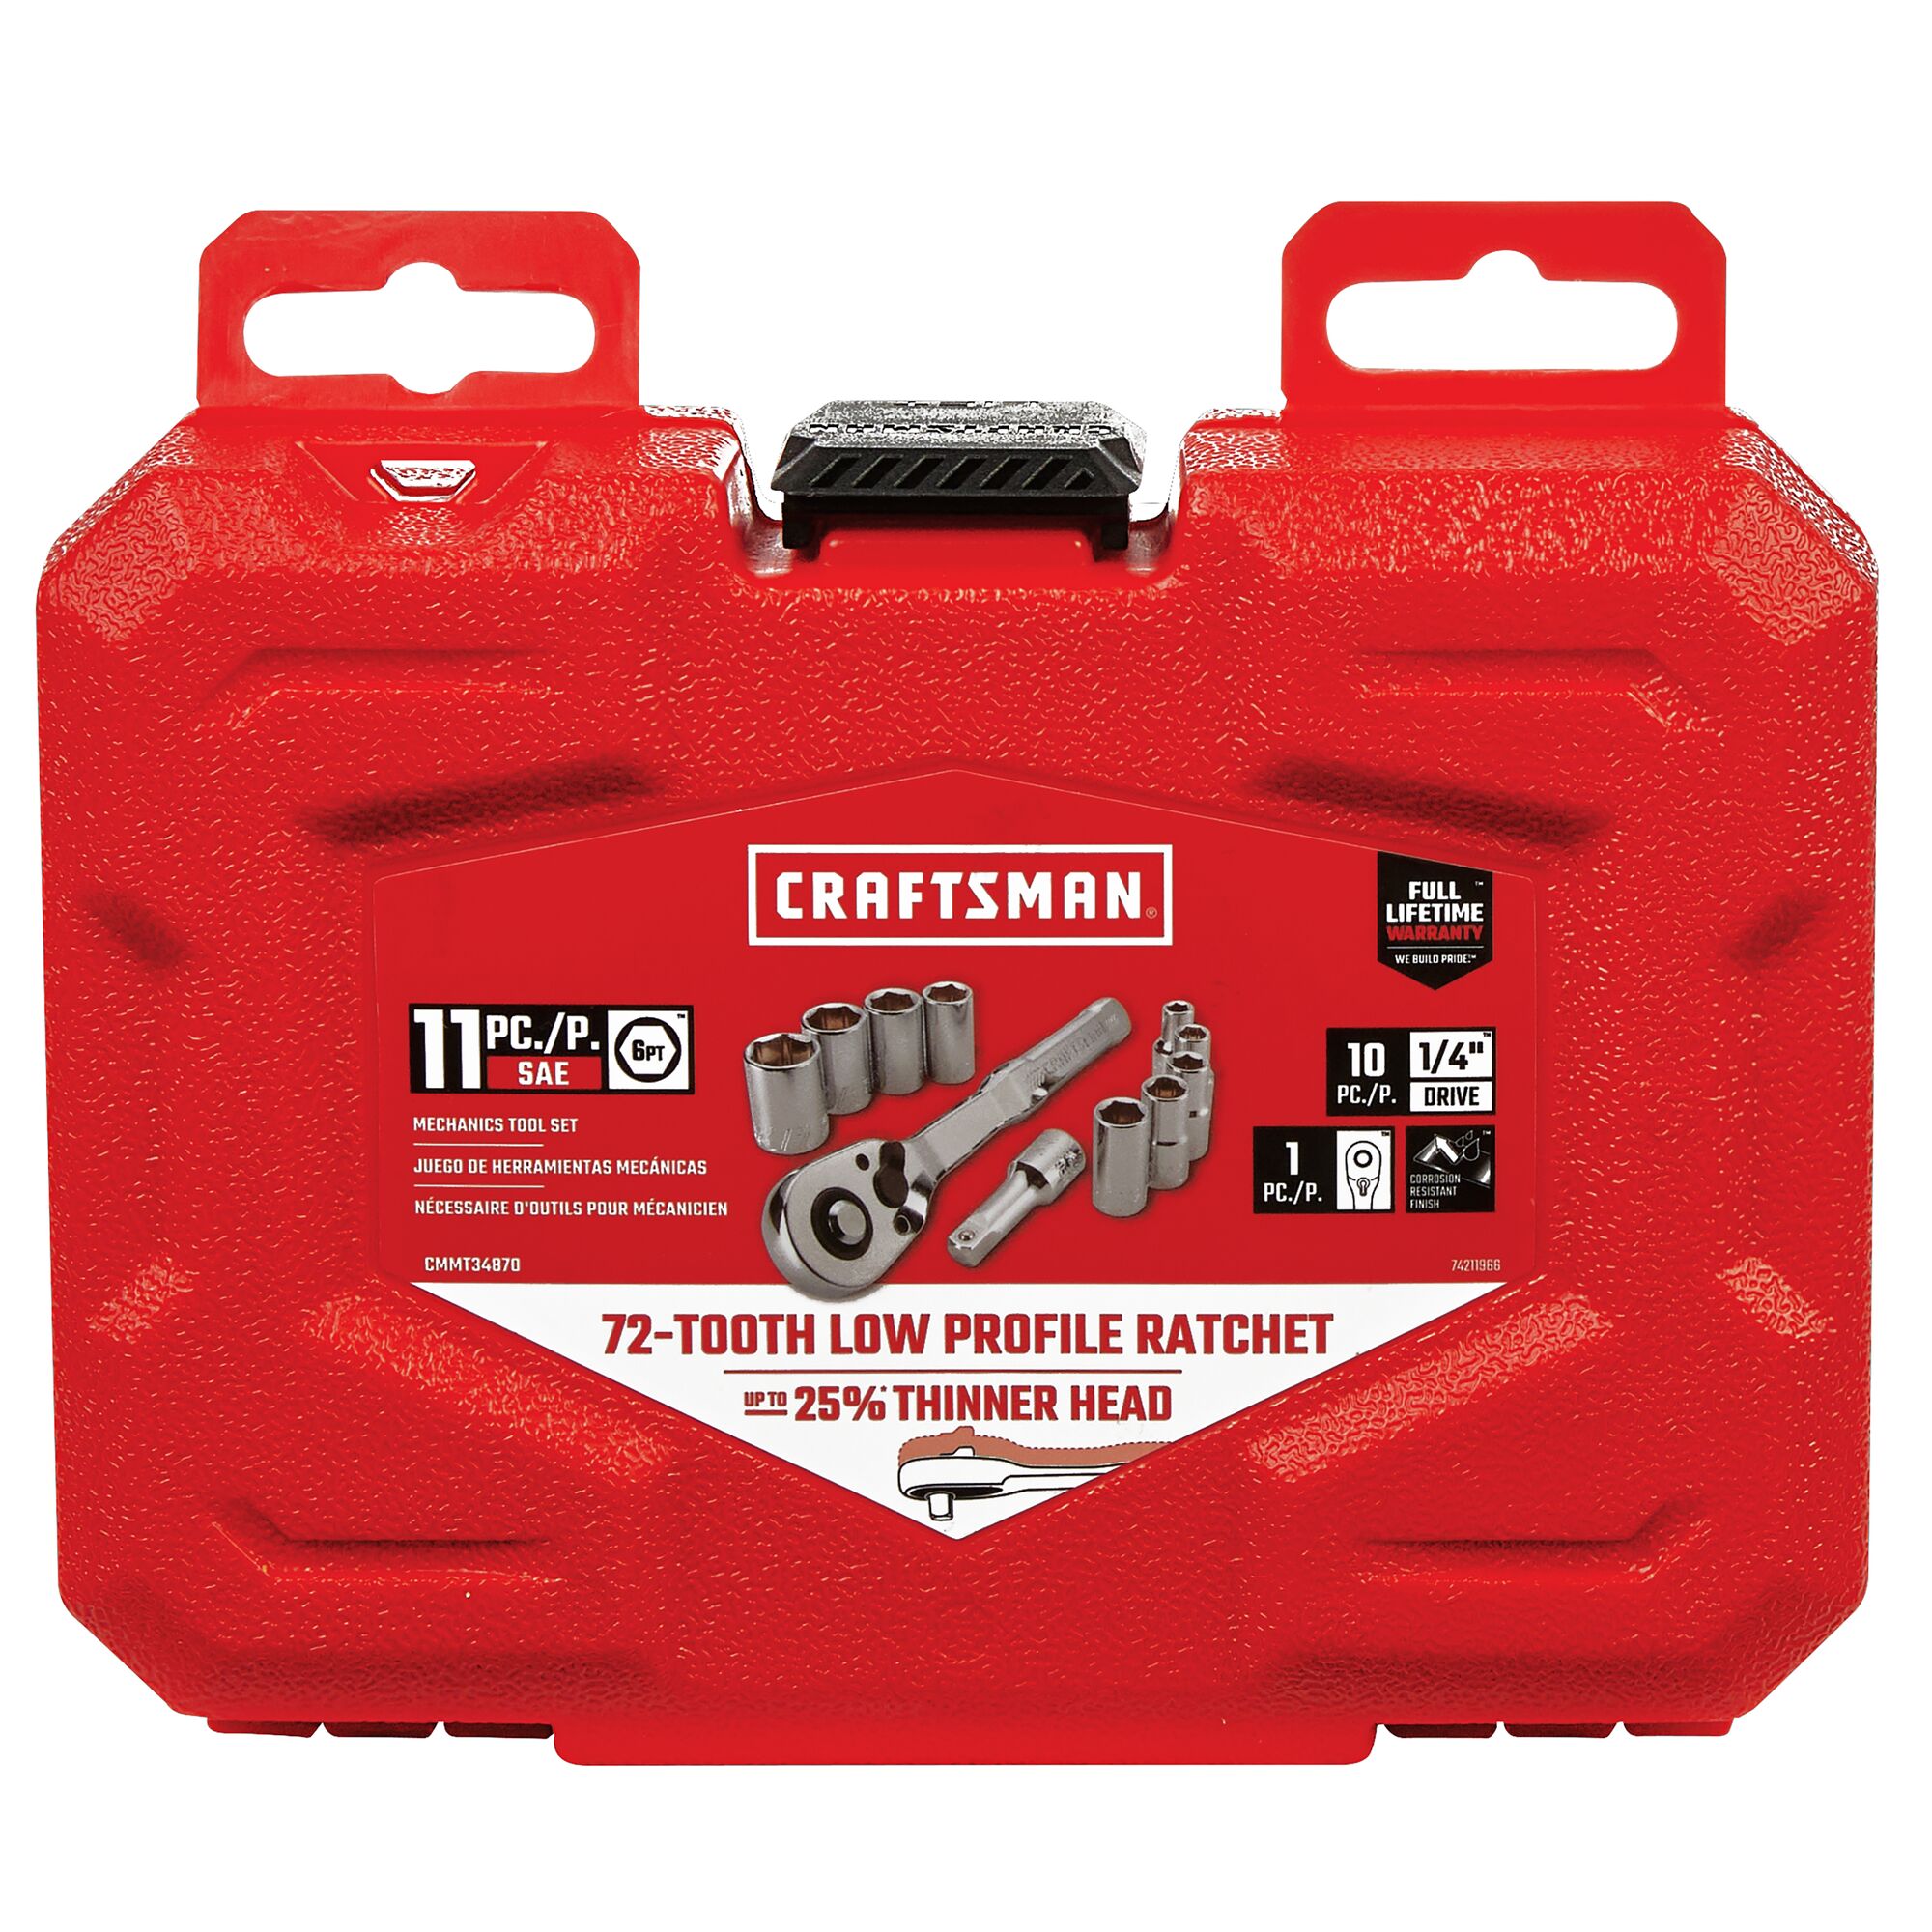 CRAFTSMAN 11 Piece 1/4 inch SAE Mechanics Tool Set in closed red packaging case